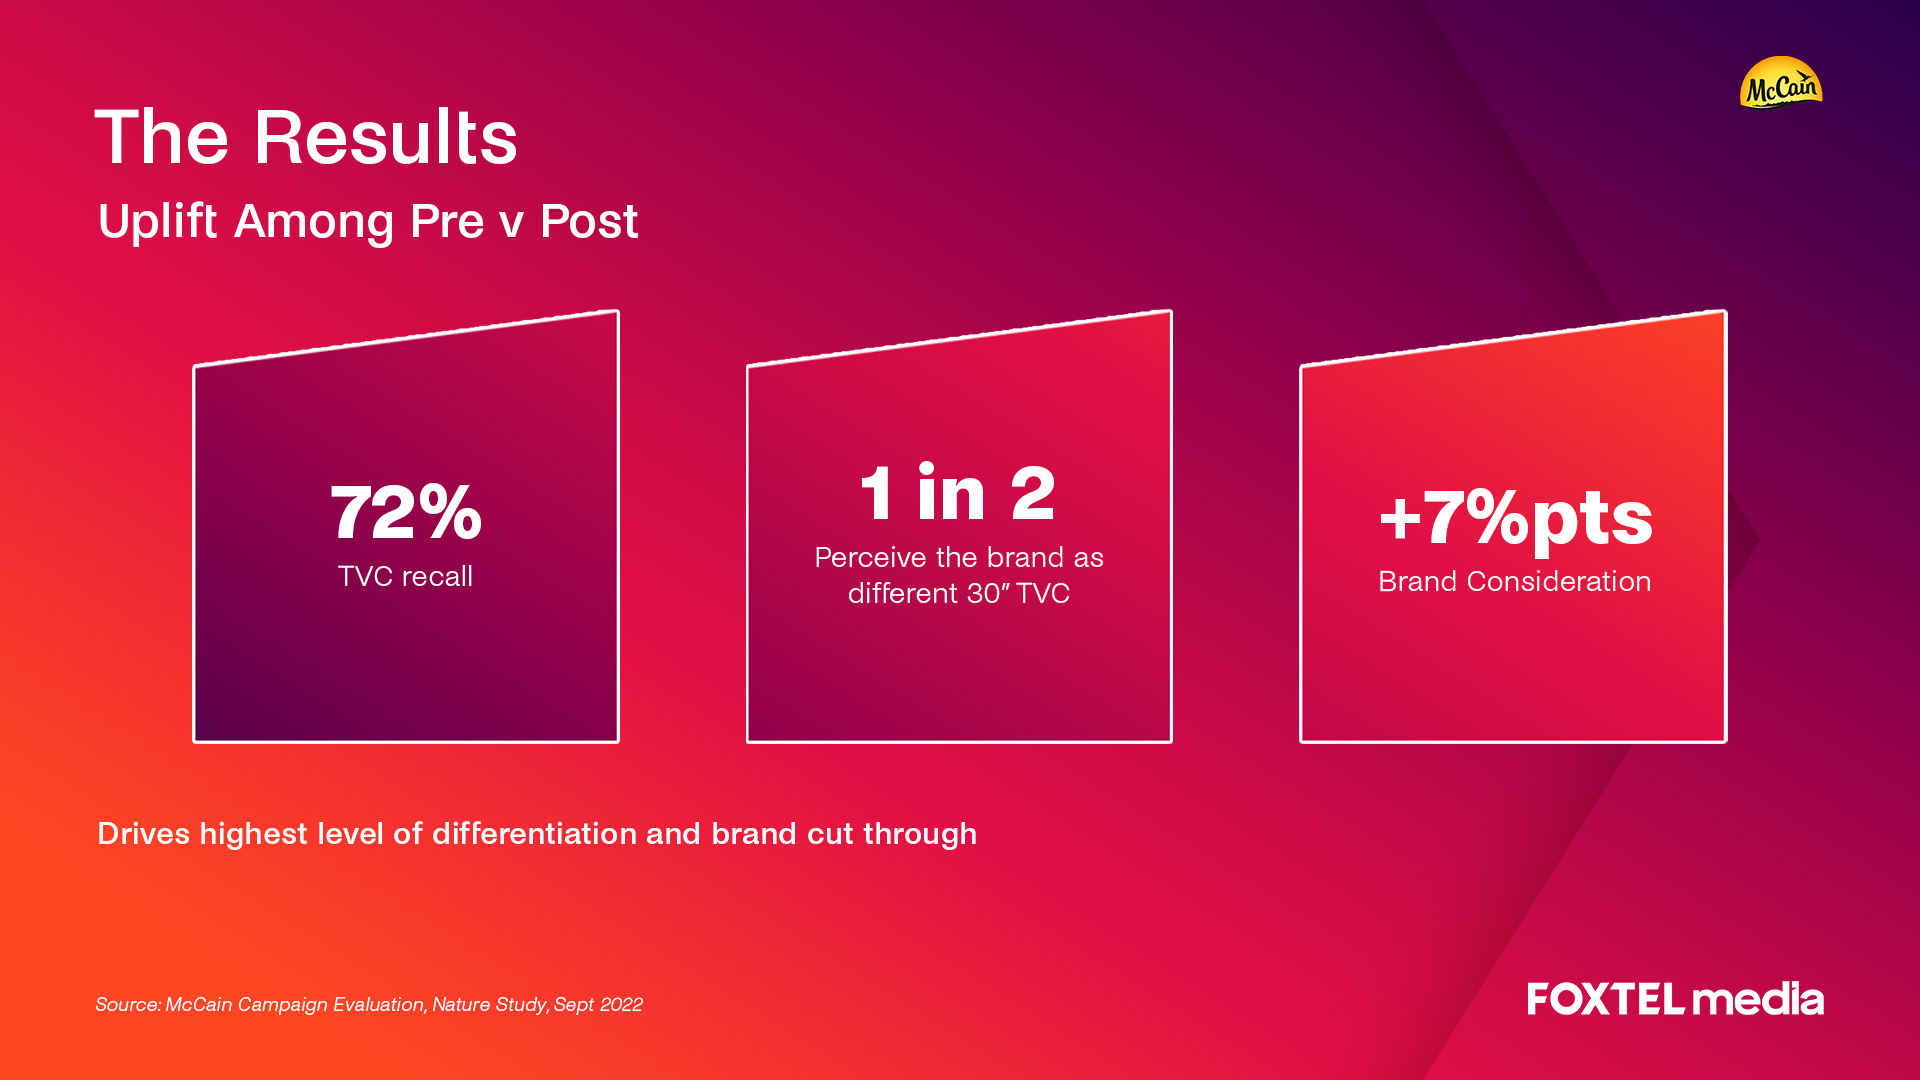 72% TVC recall, 1 in 2 perceive the brand as different 30" TVC, +7% pts brand consideration